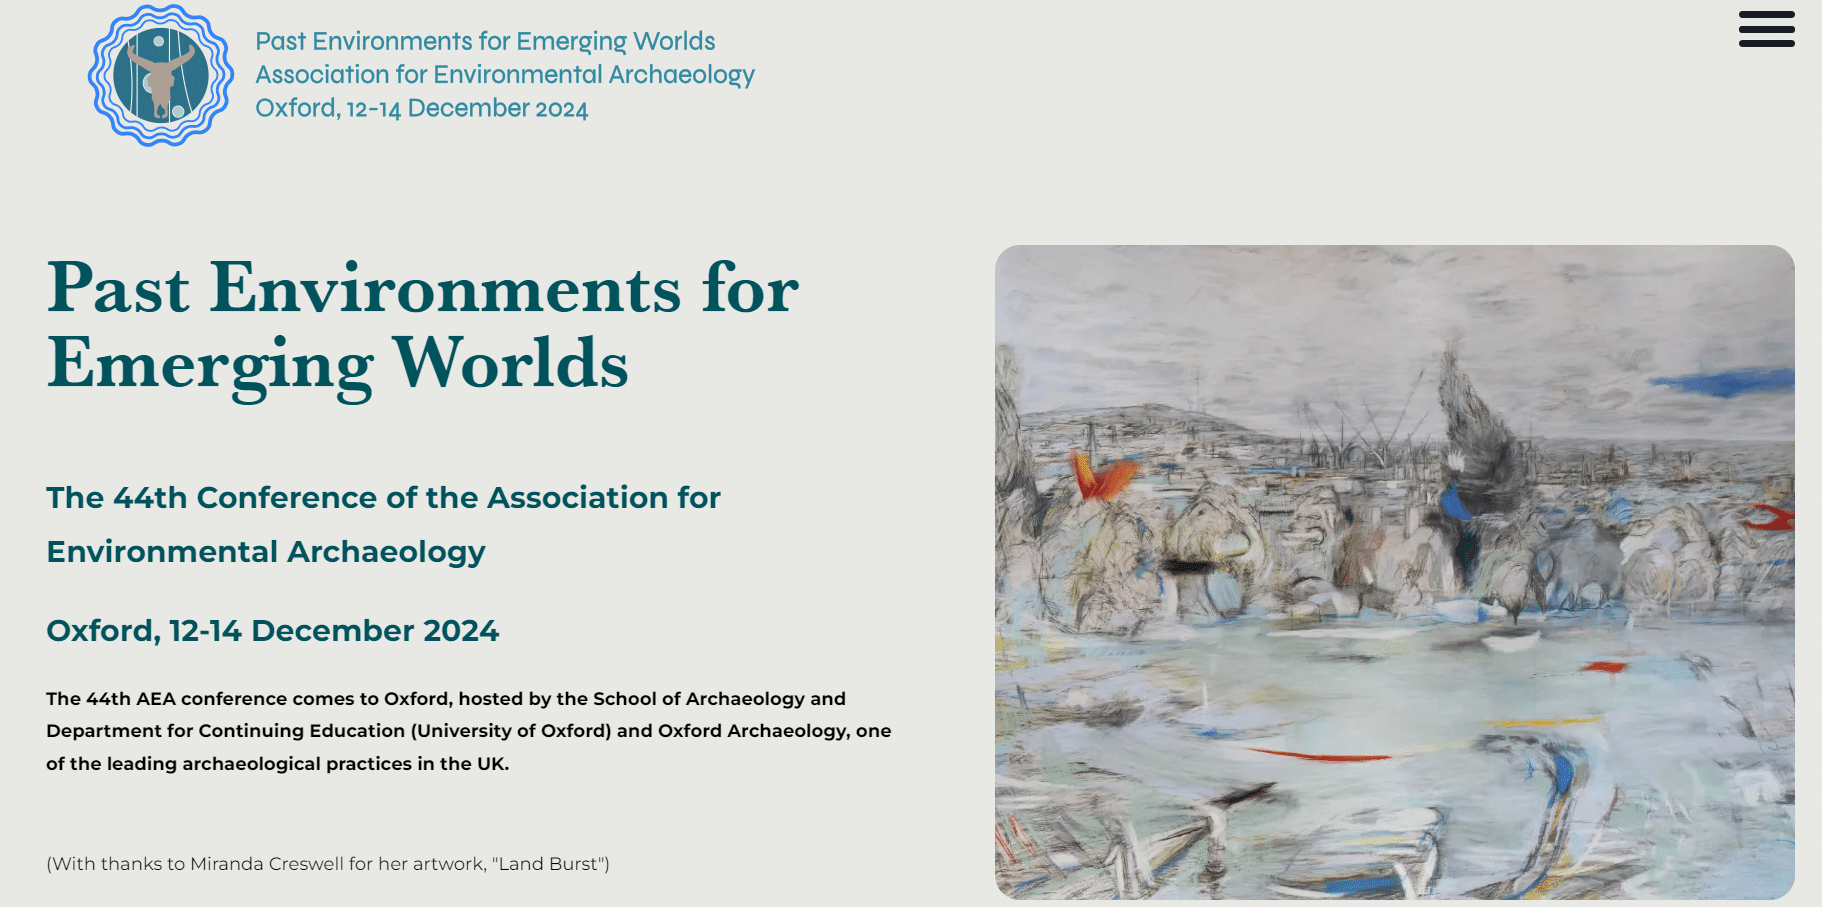 The 44th Conference of the Association for Environmental Archaeology